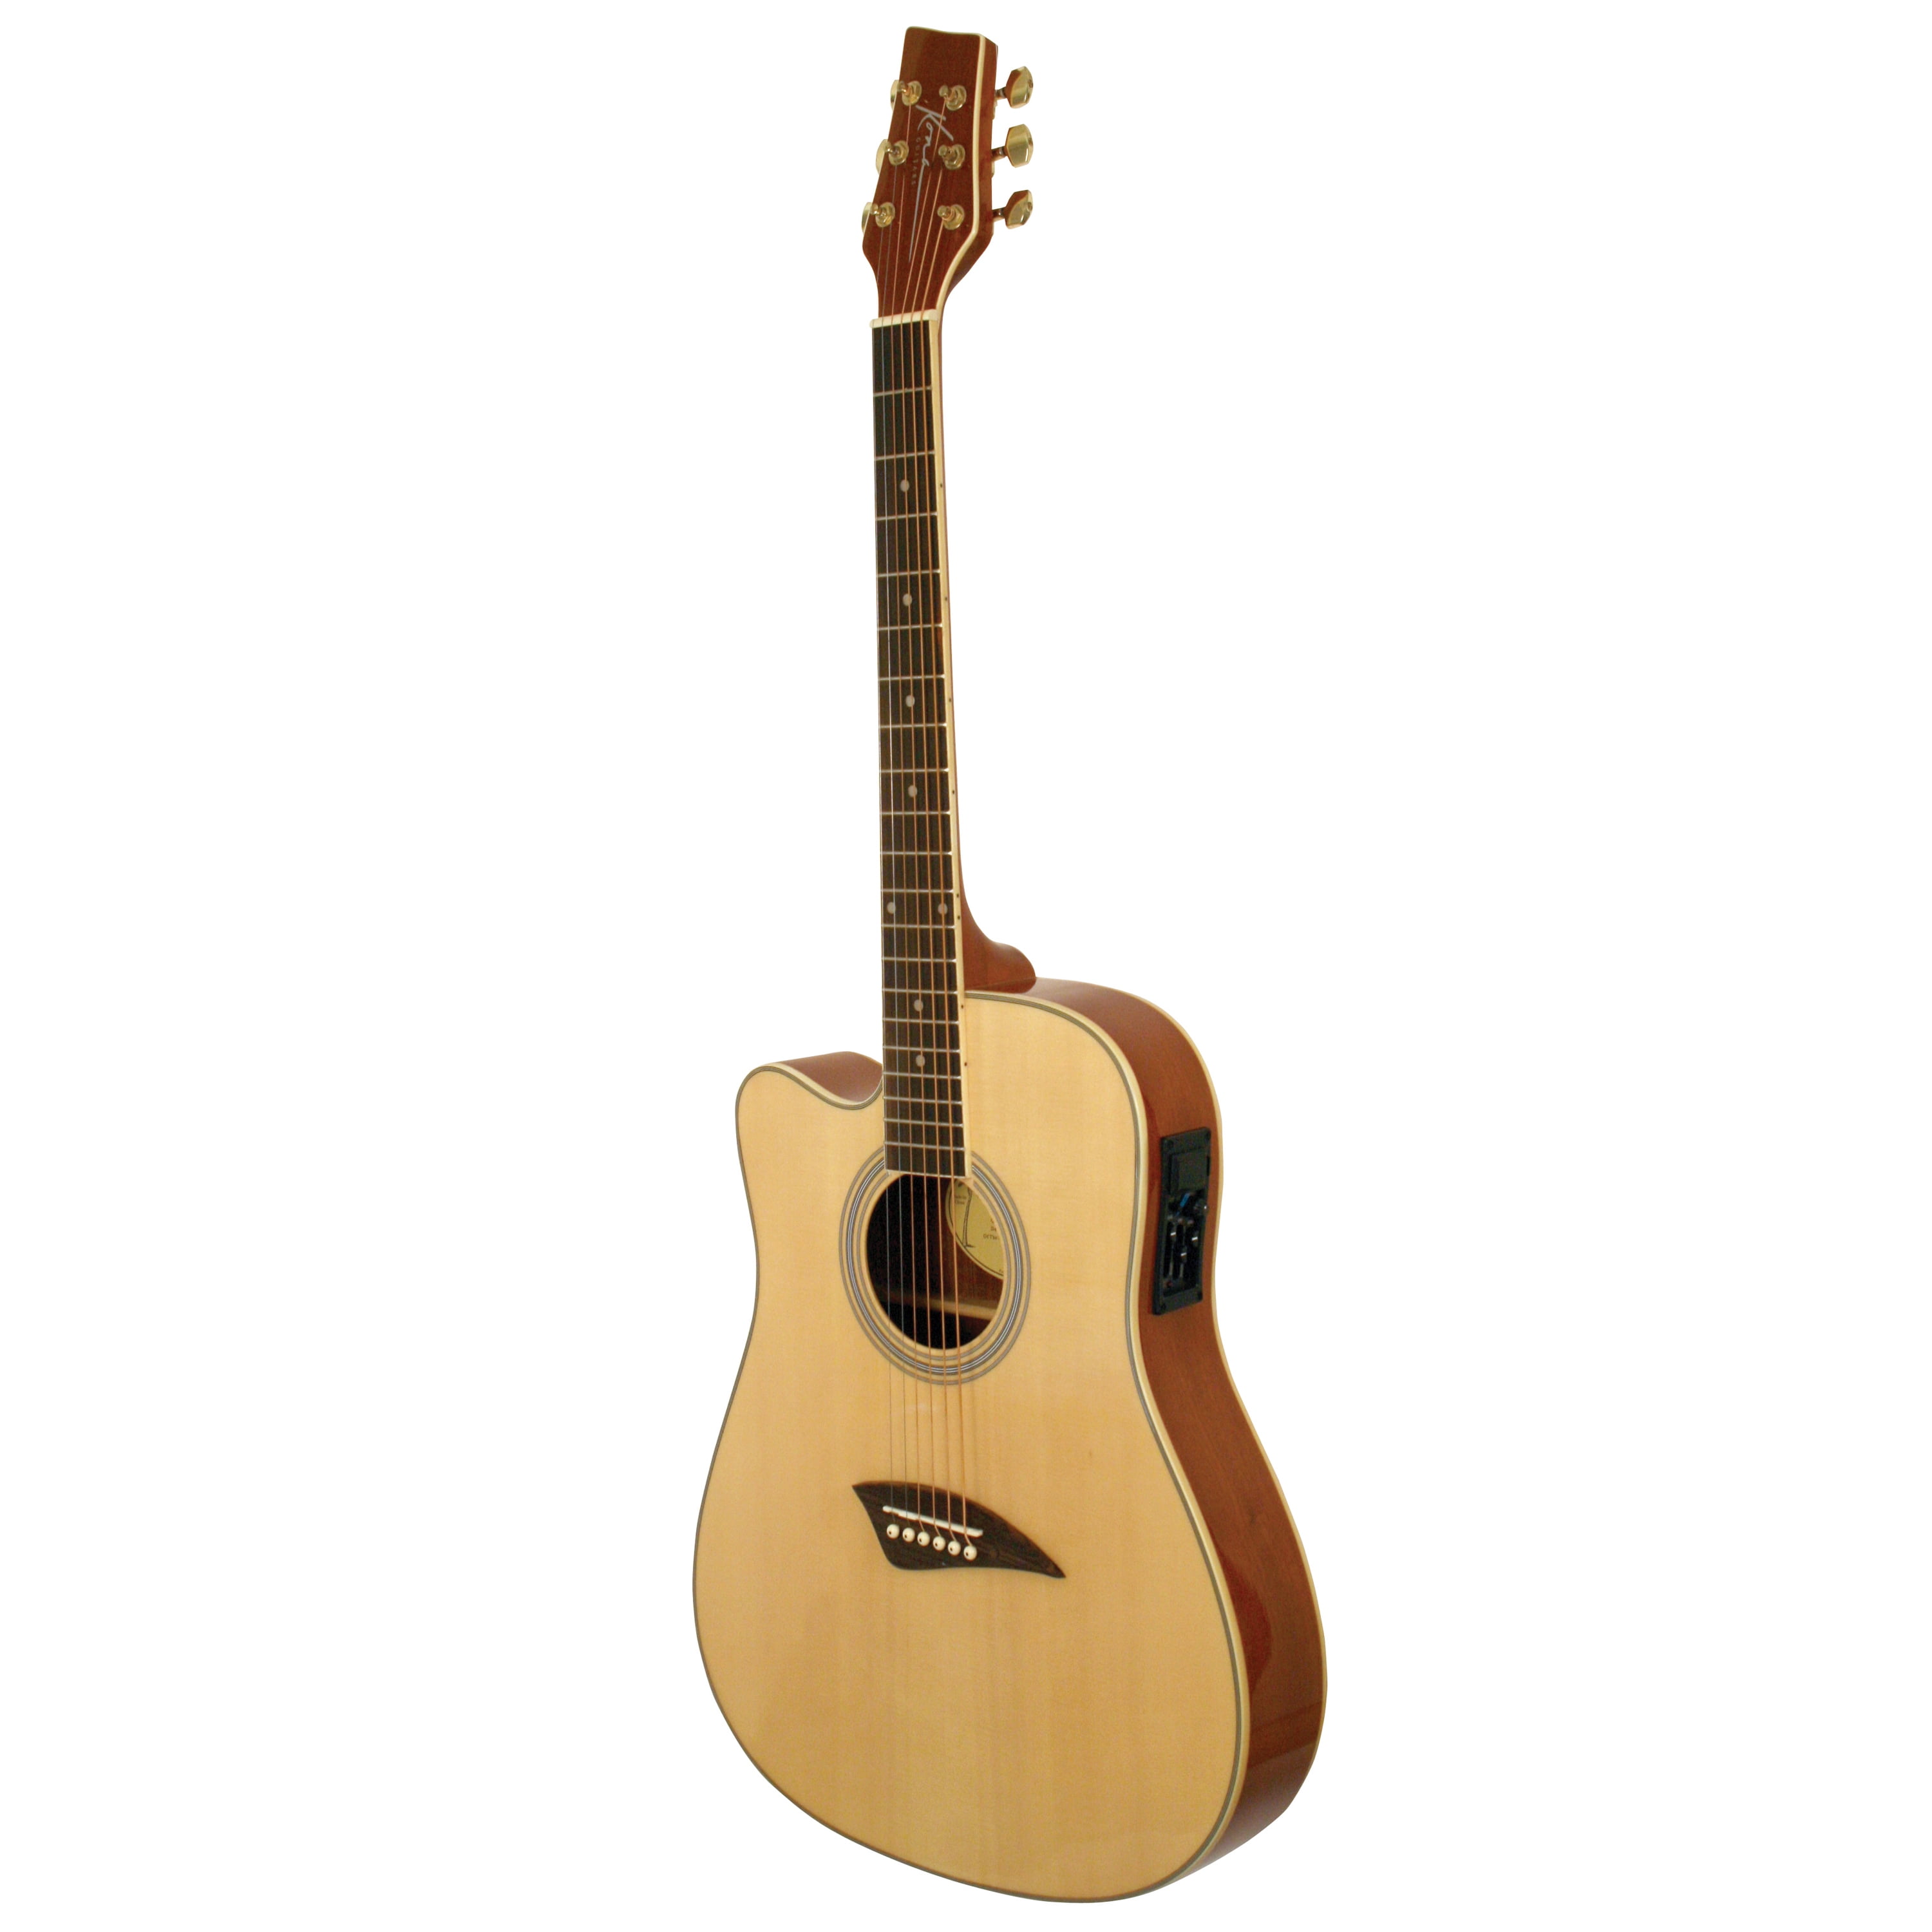 Kona Guitars K2LN Left-Handed Thin Body Acoustic-Electric Guitar with  Spruce Top in High Gloss Finish, Natural